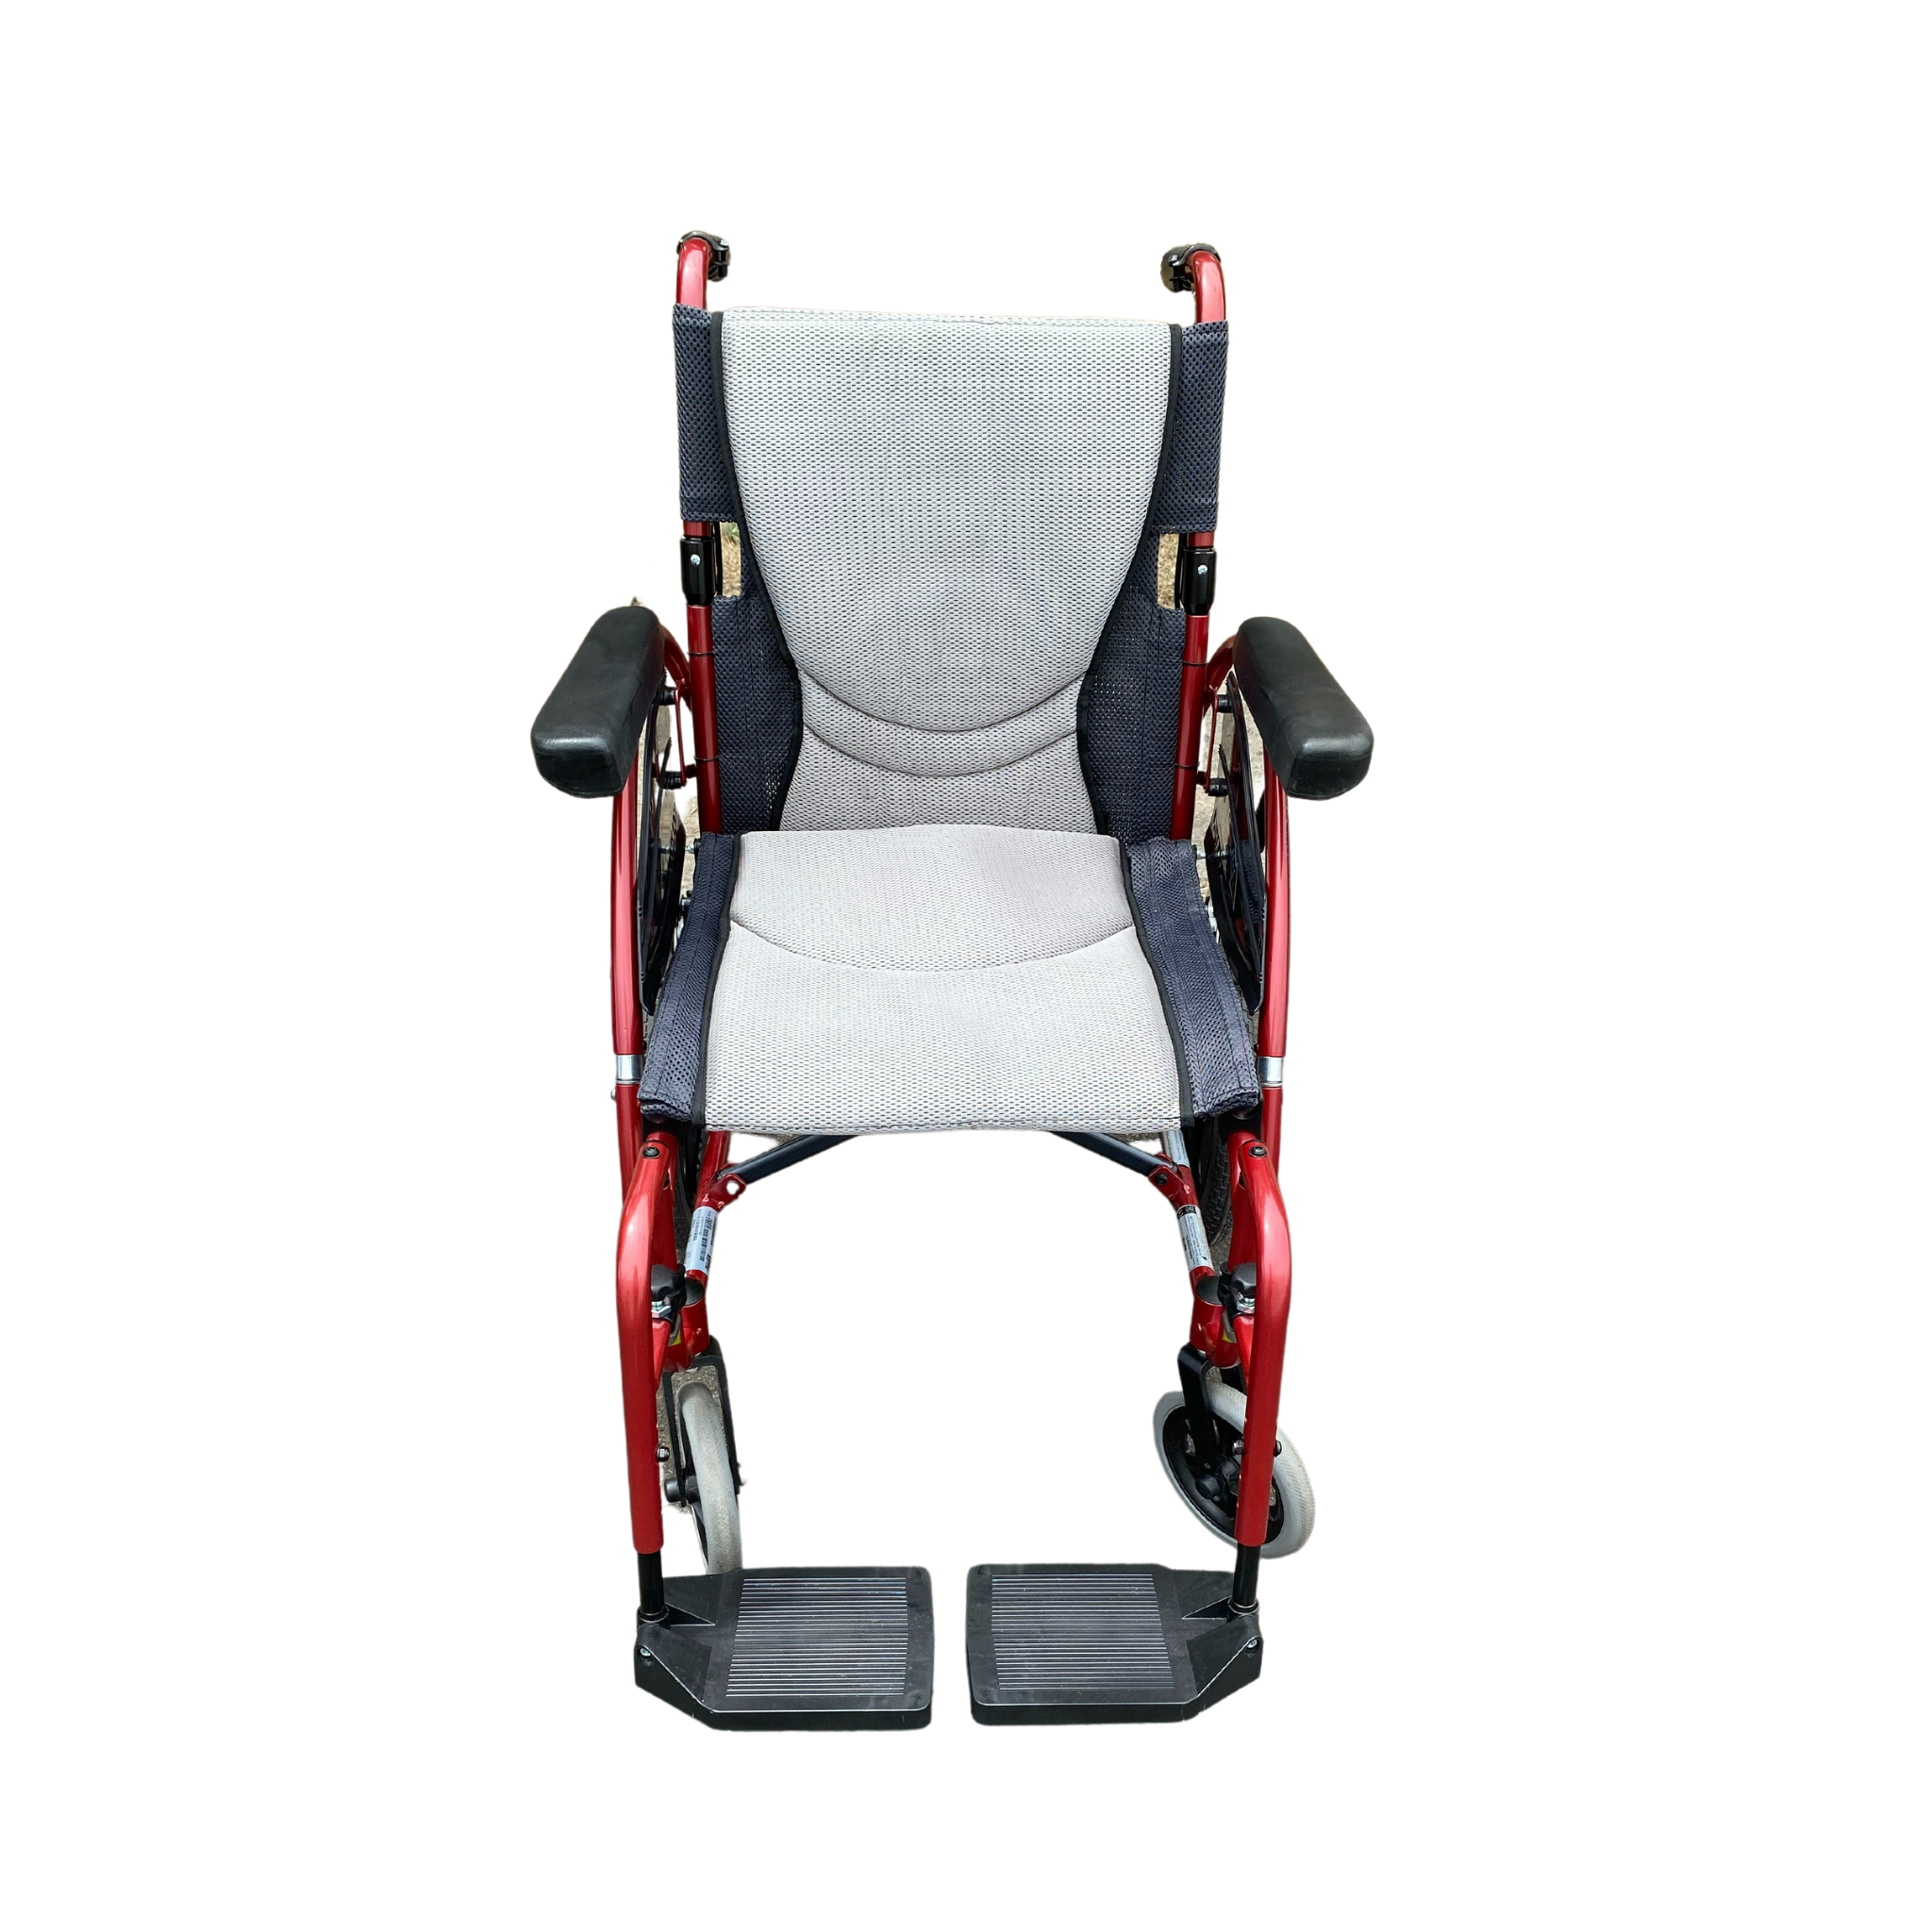 Rental - Karma Transit 18" Wheelchair from Aged Care and Medical